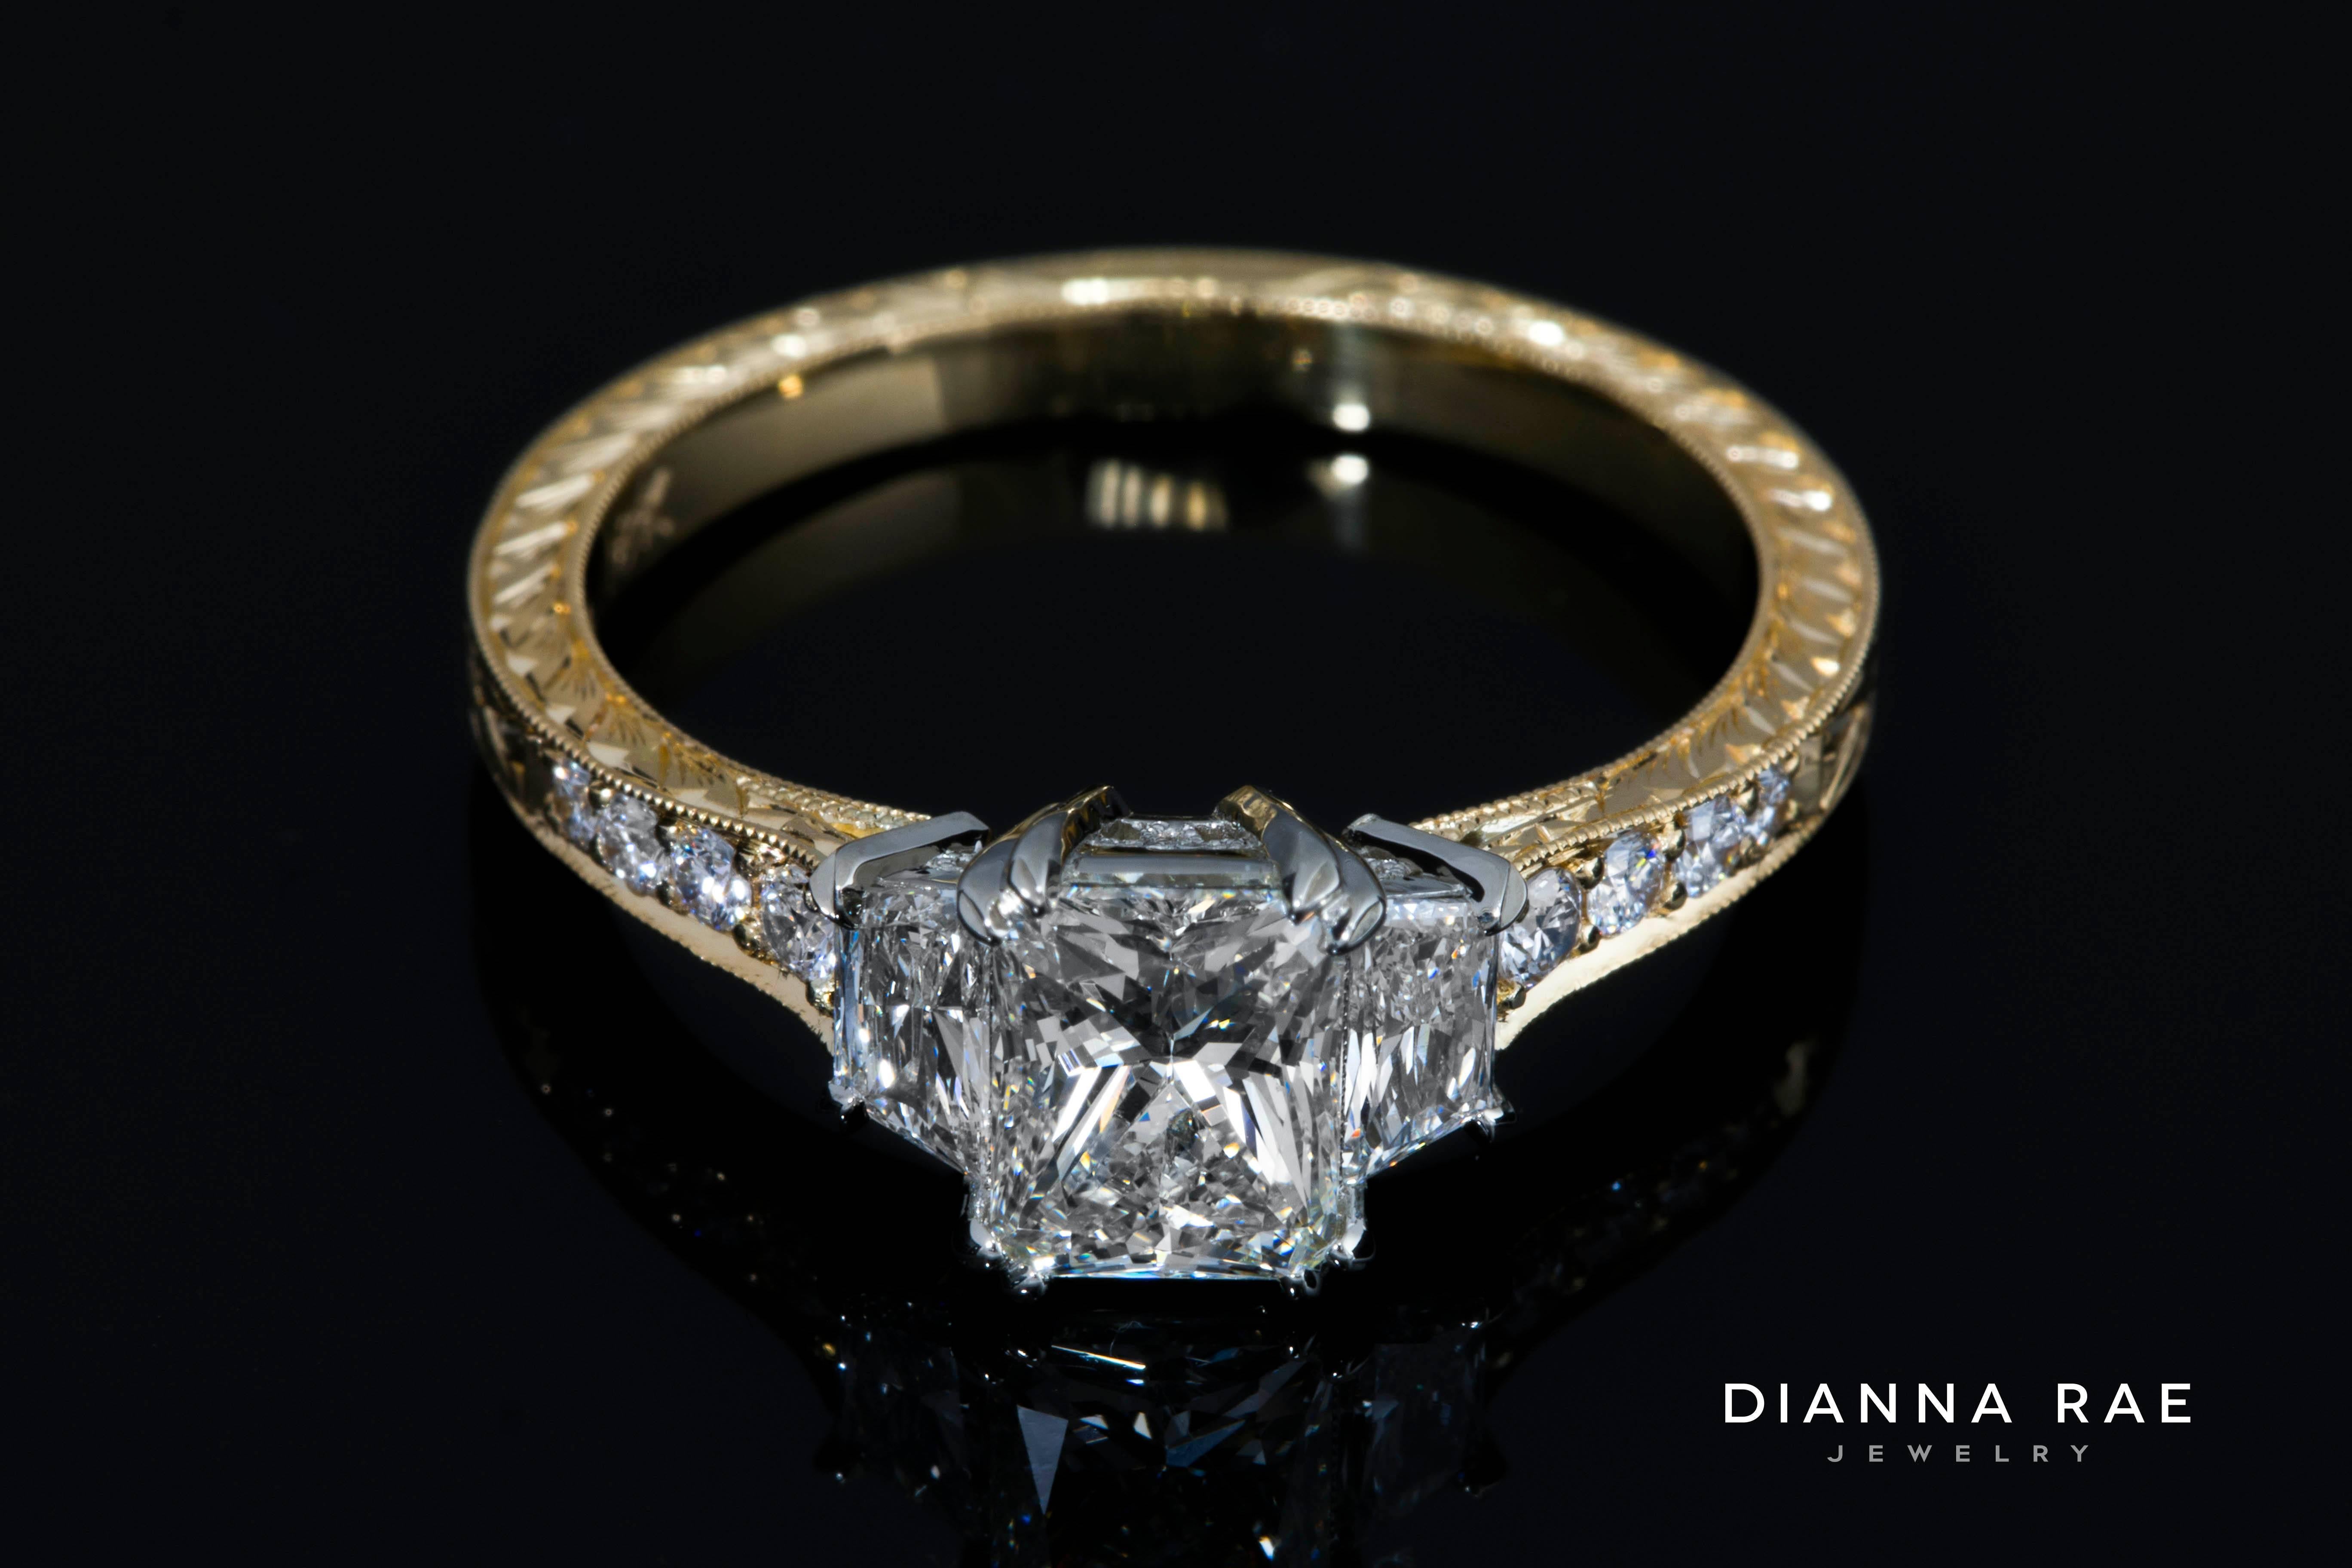 1.46ct tw Radiant Diamond Engagement Ring with Hand Engraved 18K Yellow Gold

This diamond ring is a one-of-a-kind, handmade in 18K yellow gold with platinum prongs.  My goldsmith hand engraved the amazing detail on the band.  You can actually see a